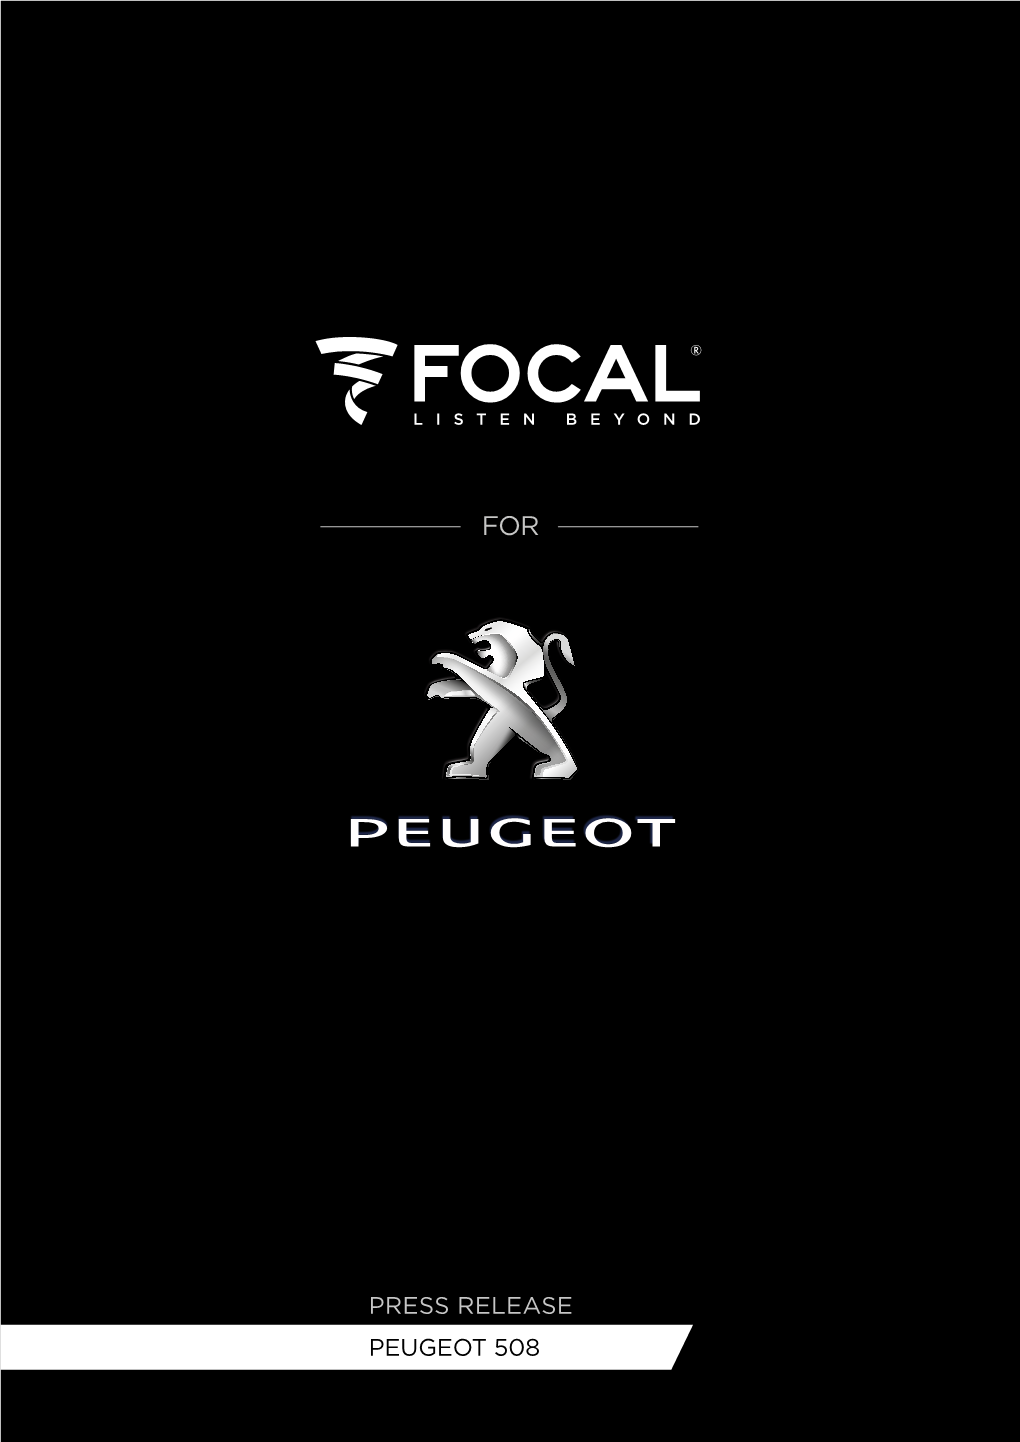 PRESS RELEASE PEUGEOT 508 FOCAL Signs the Premium Hi-Fi Option for the New PEUGEOT 508 P